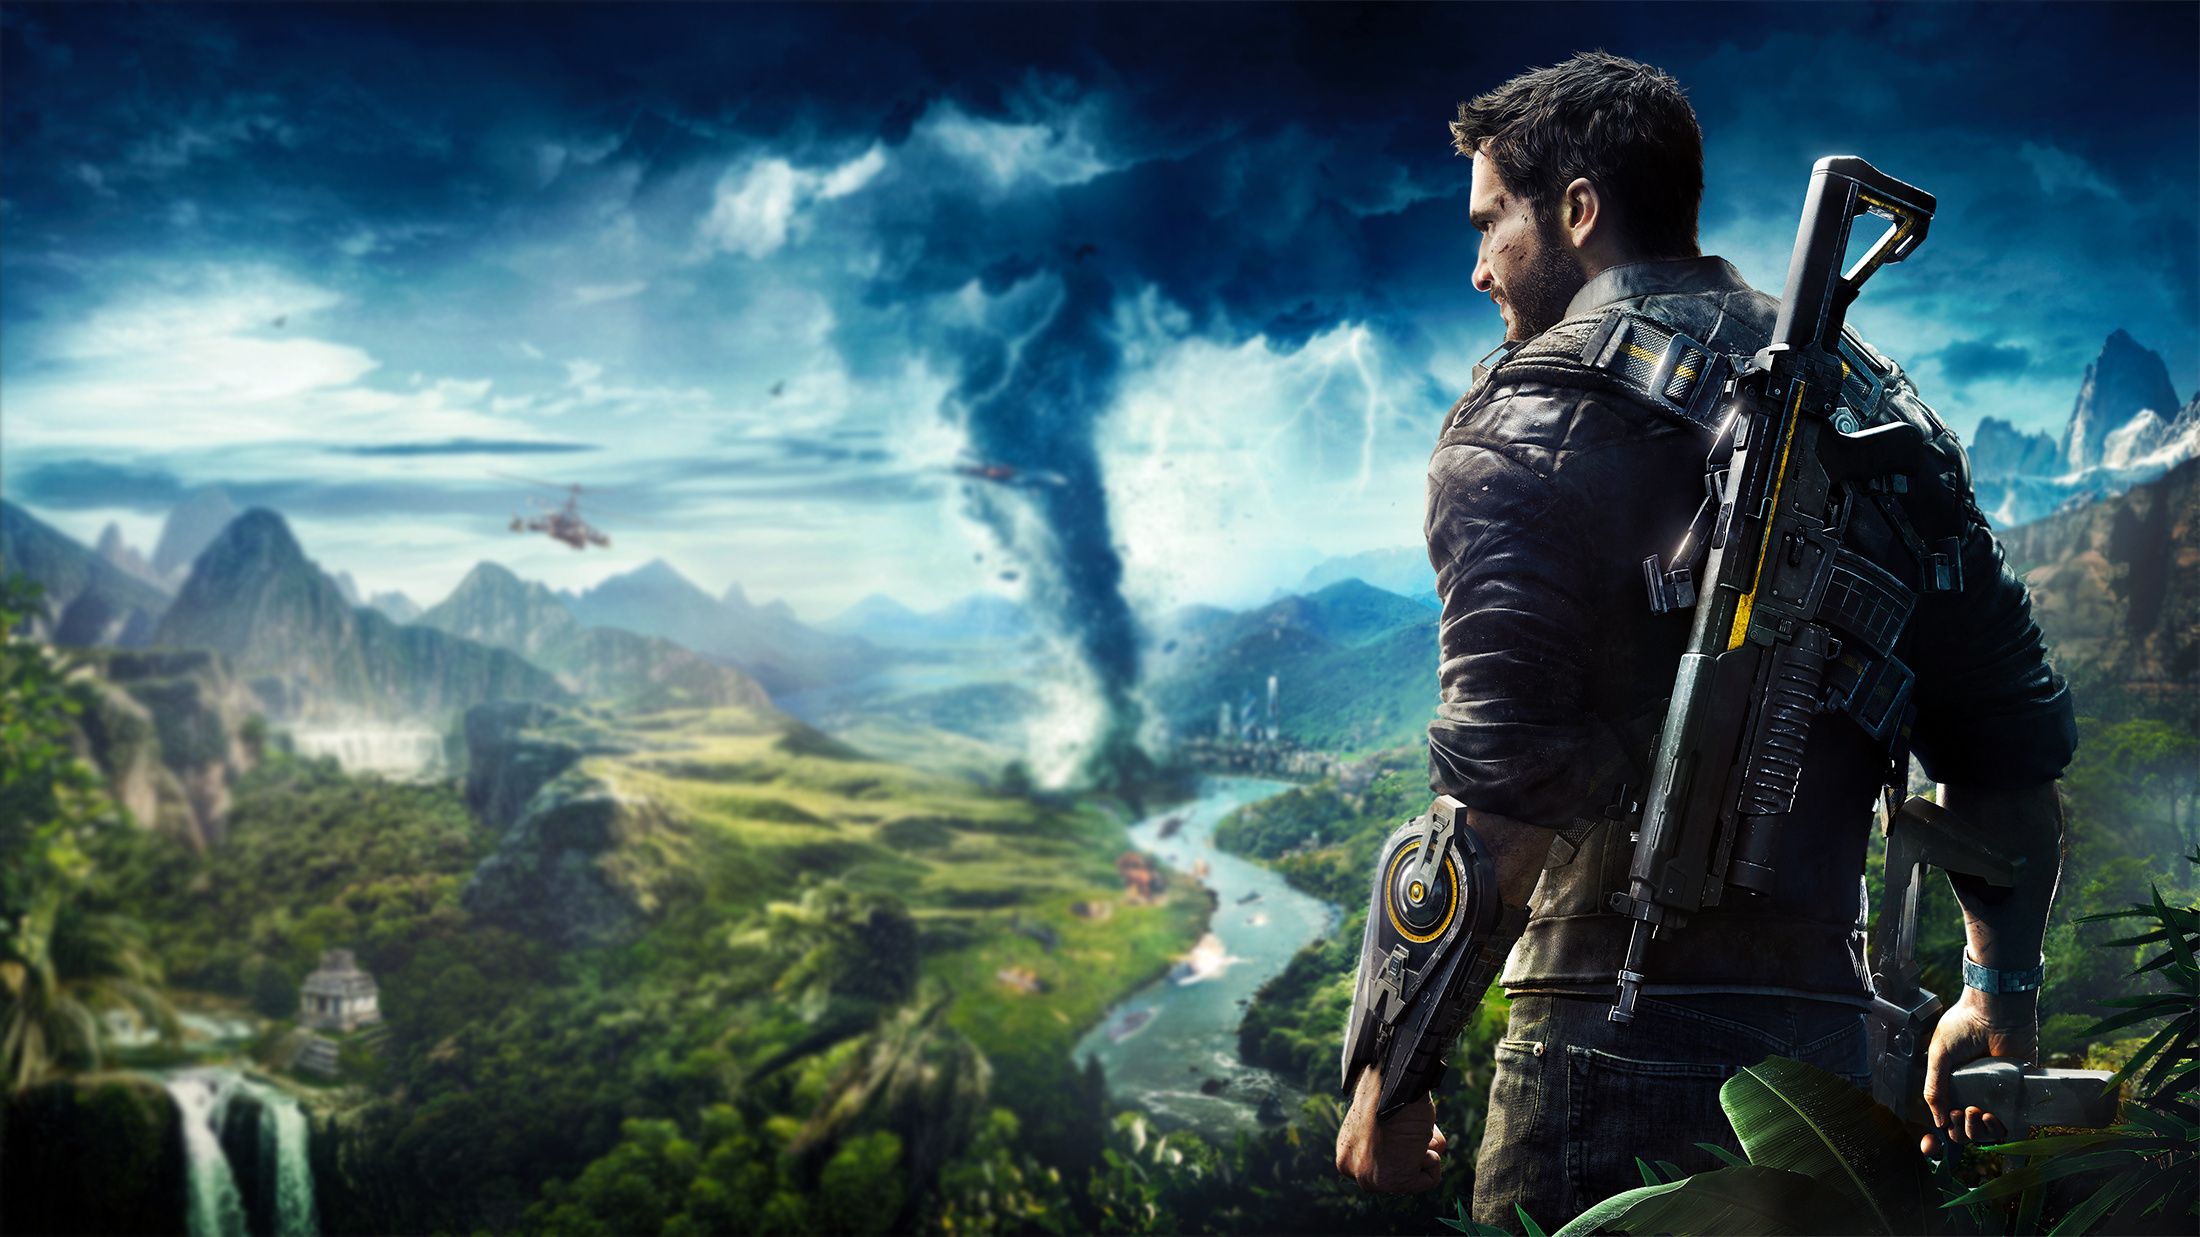 Action Adventure Game (Gaming), Just Cause 4 wallpapers, Action-packed adventure, Explosive gameplay, 2200x1240 HD Desktop